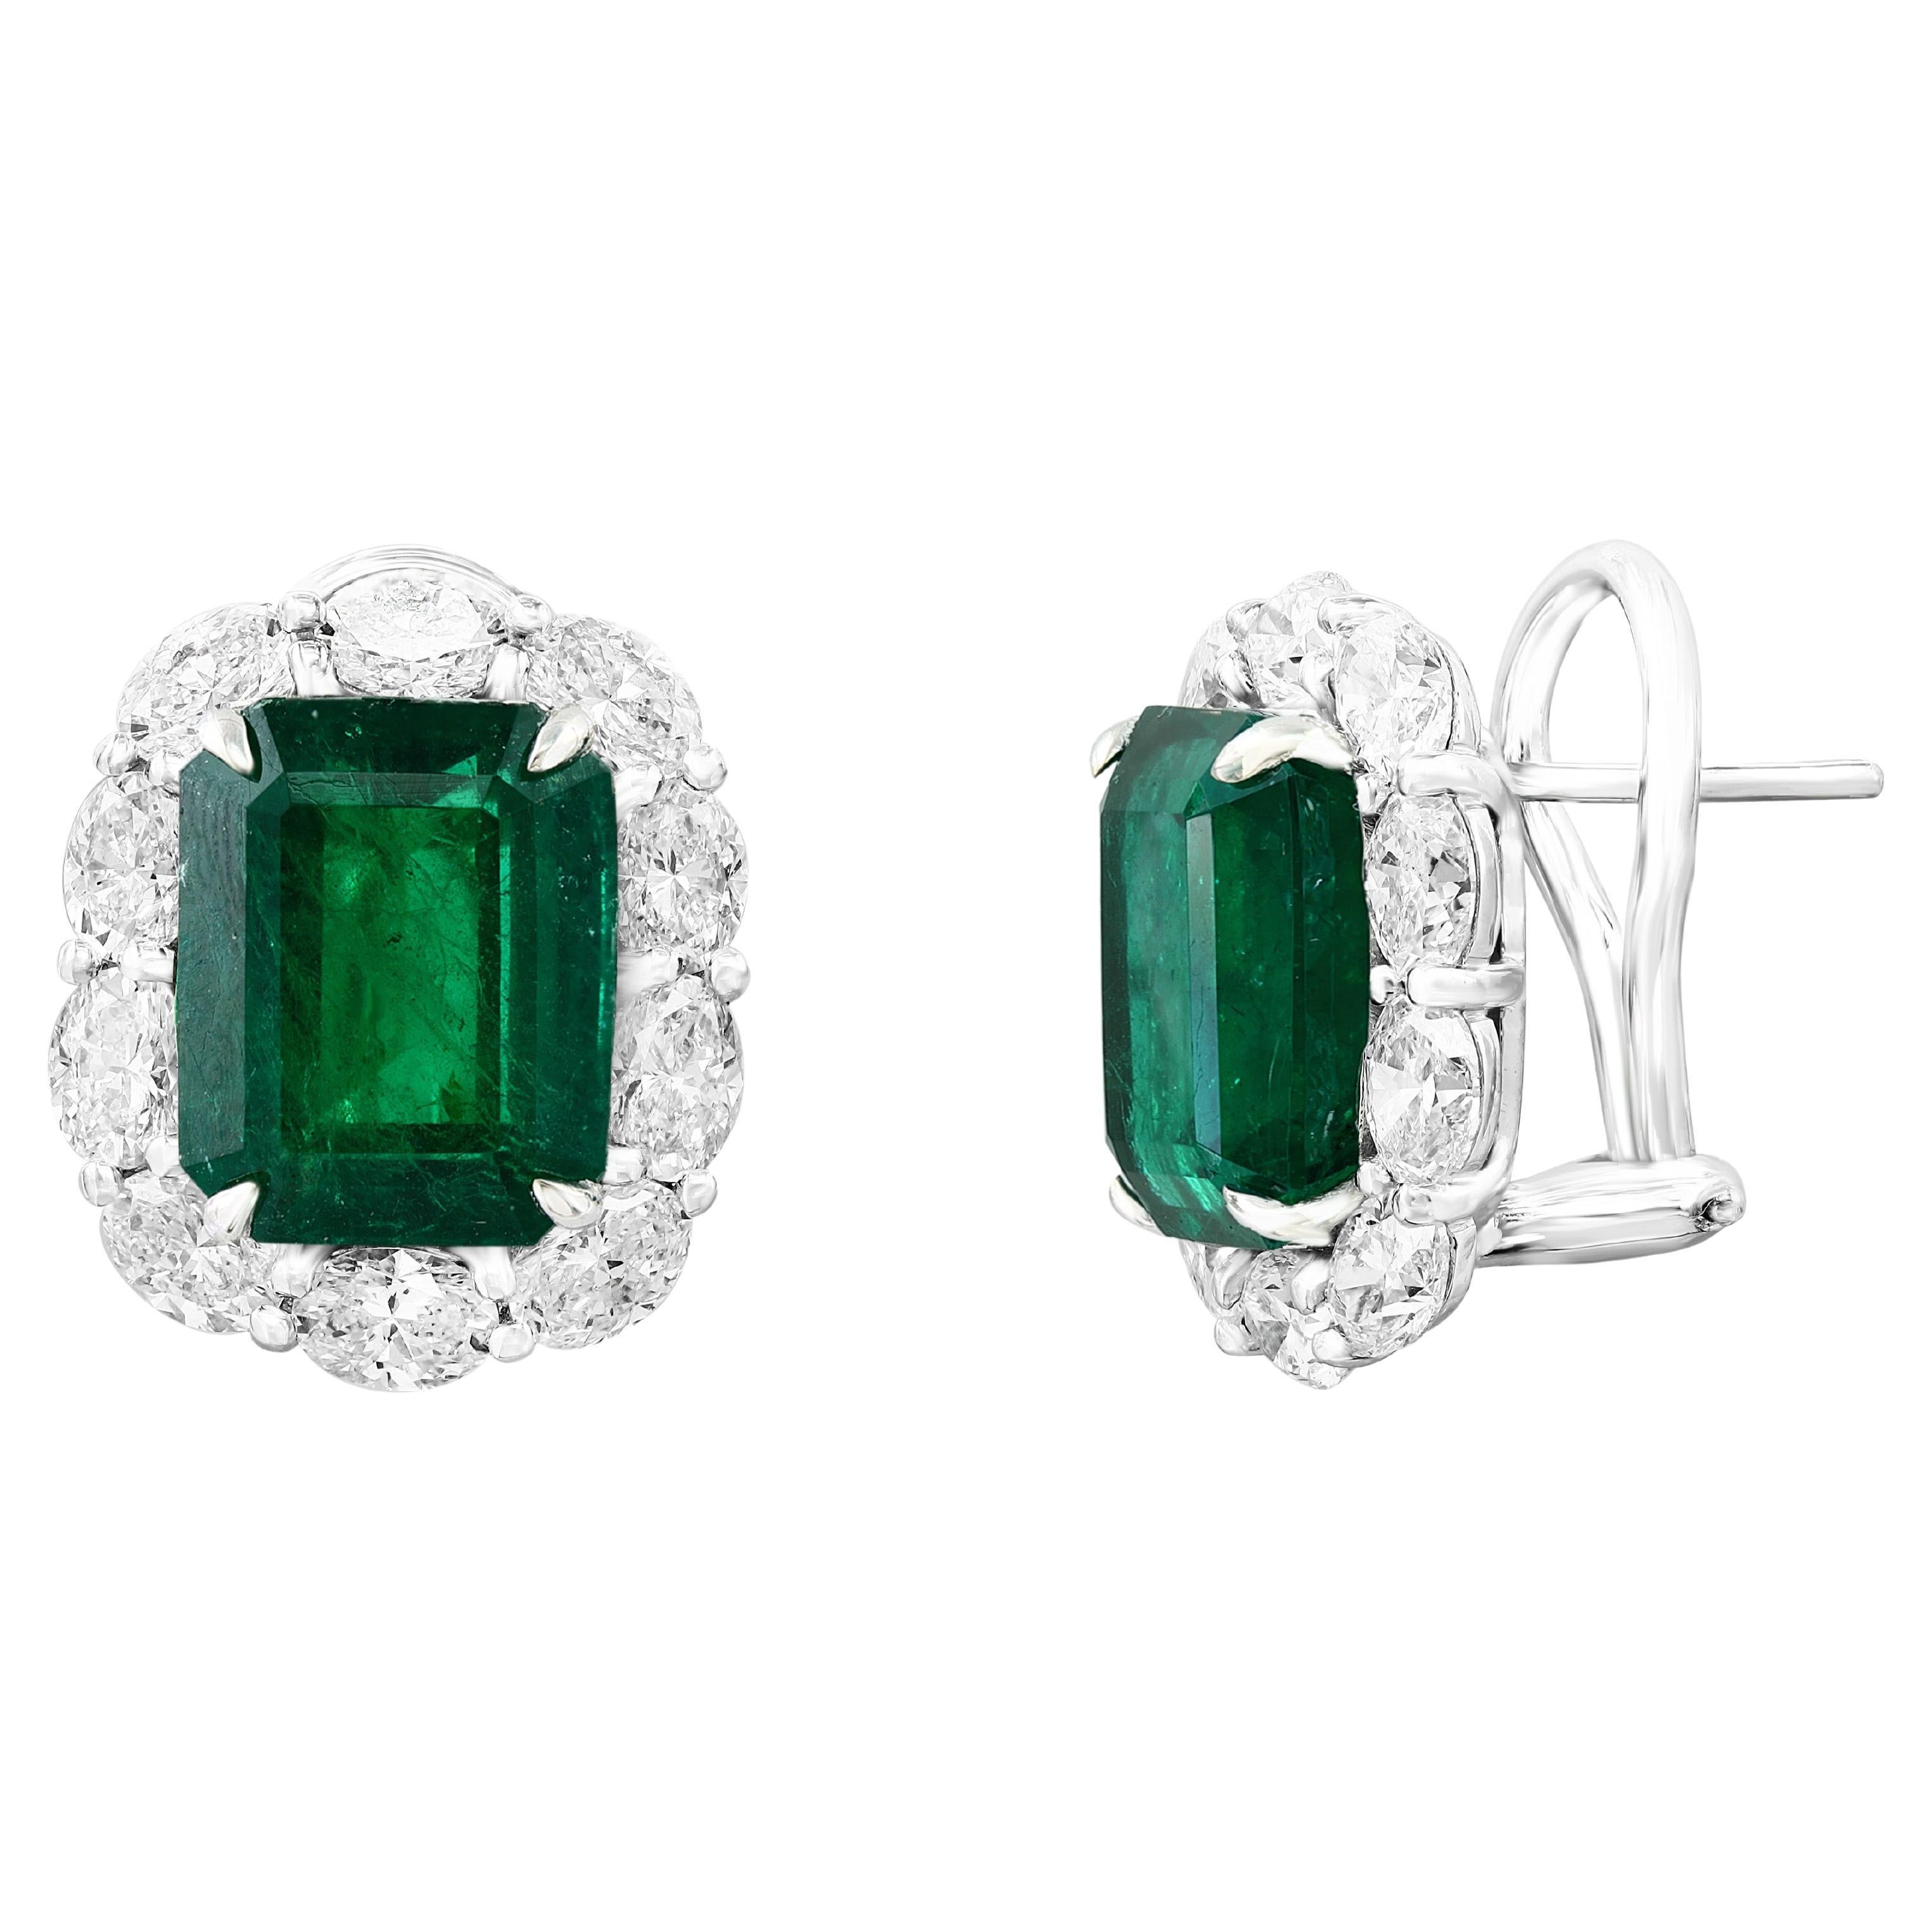 7.44 Carat Emerald Cut Emerald and Diamond Halo Earring in 18K White Gold For Sale